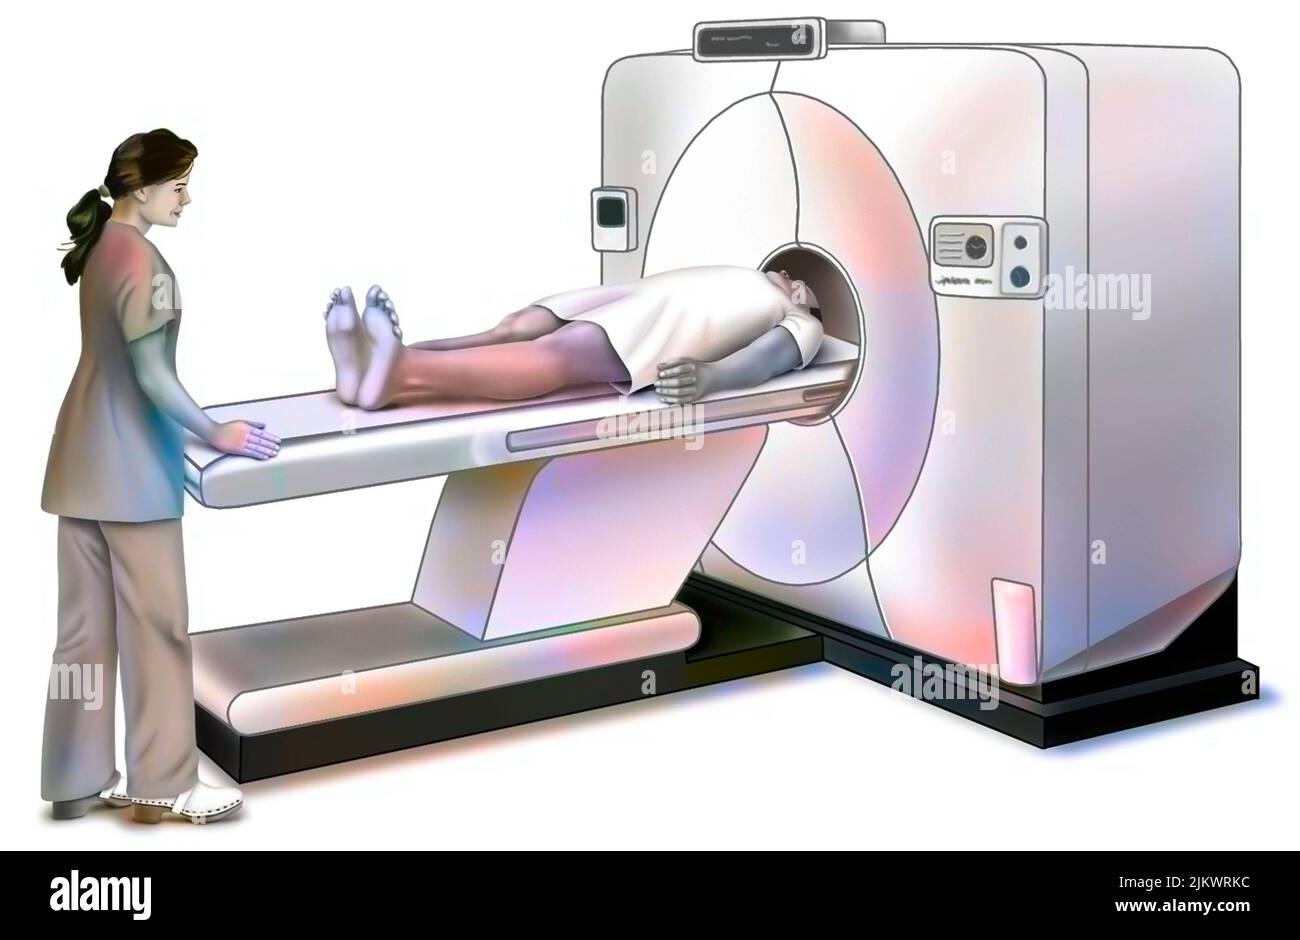 Pet scan: medical imaging device to detect tumors and metastases. Stock Photo